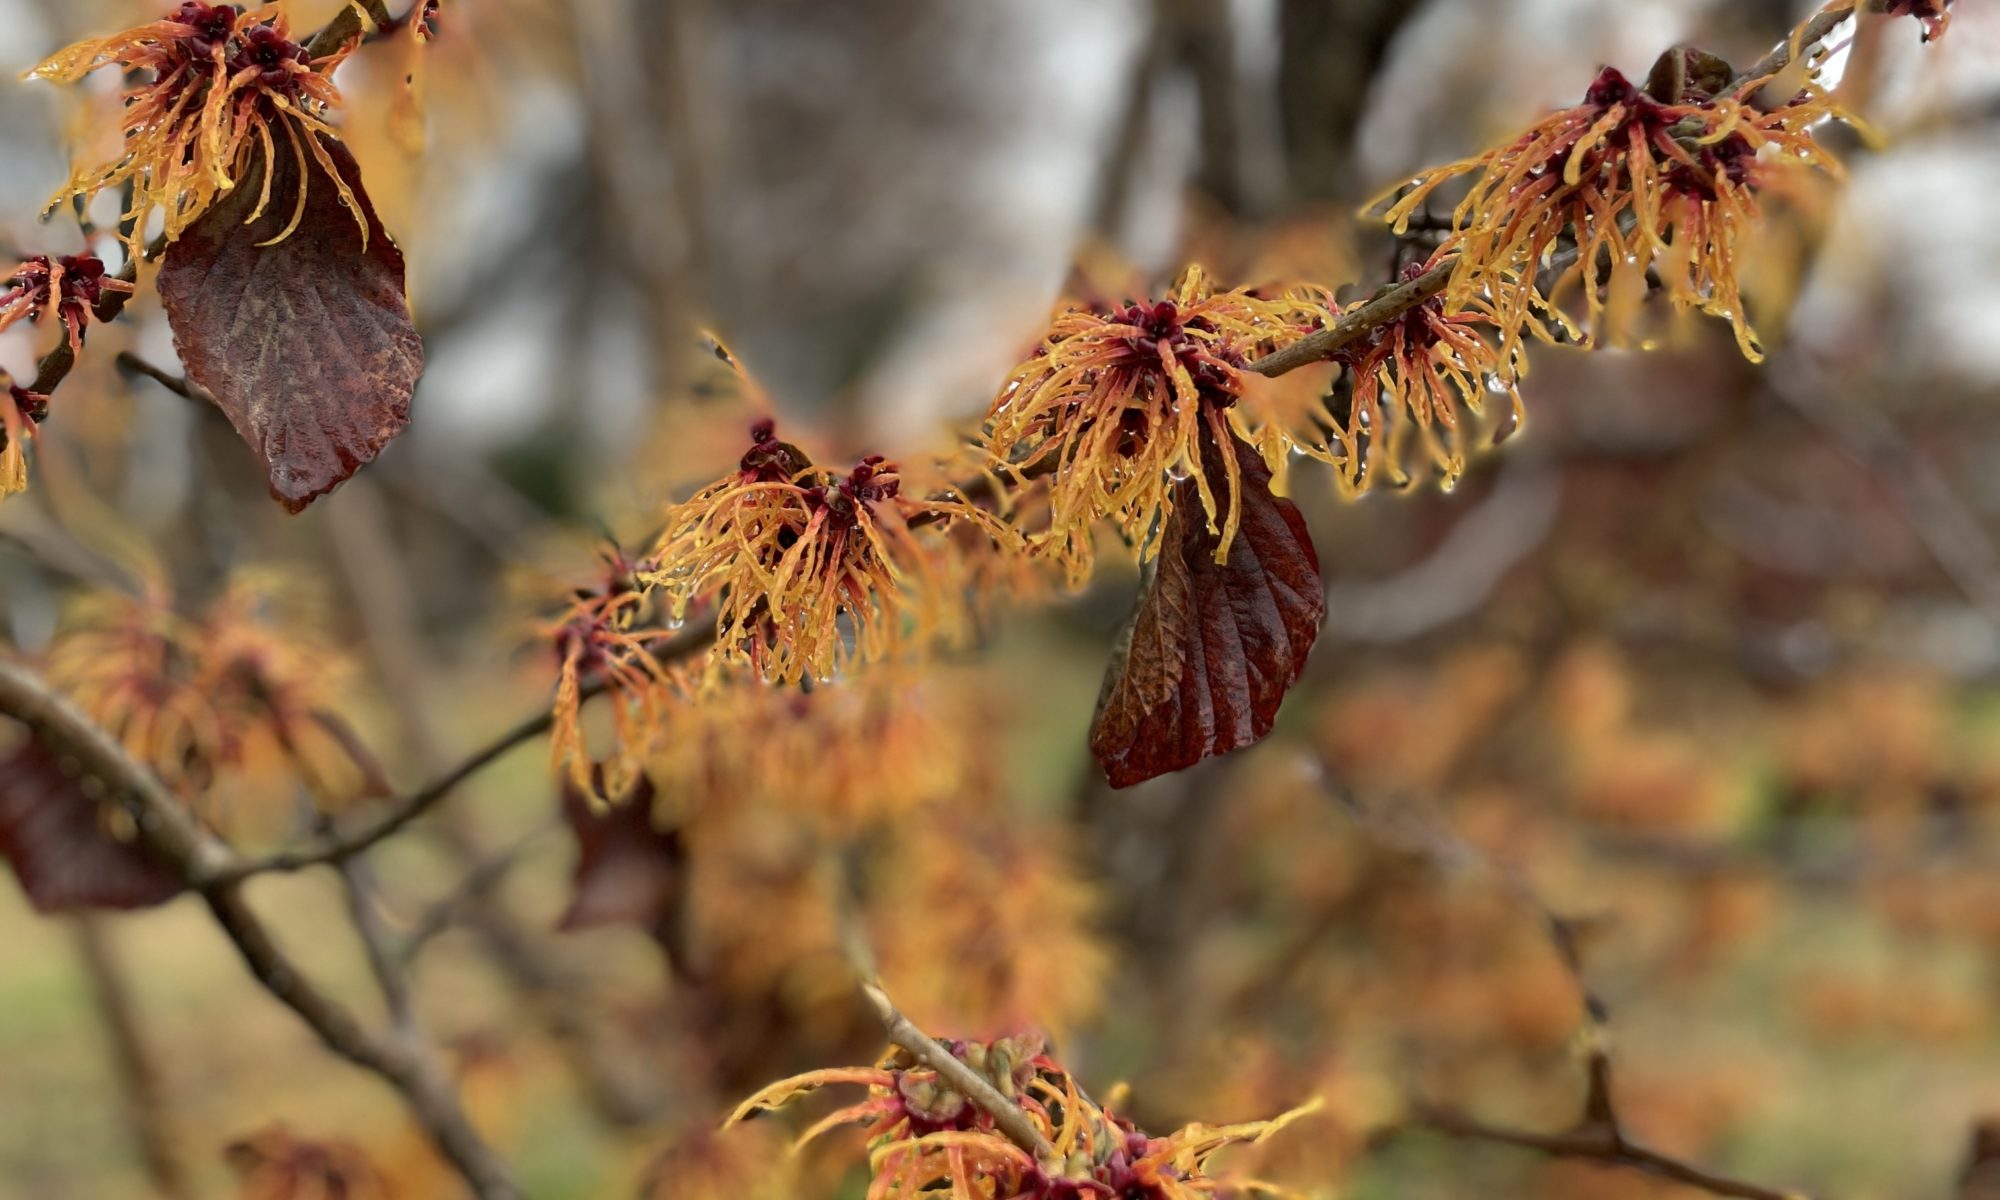 Witchhazel in bloom